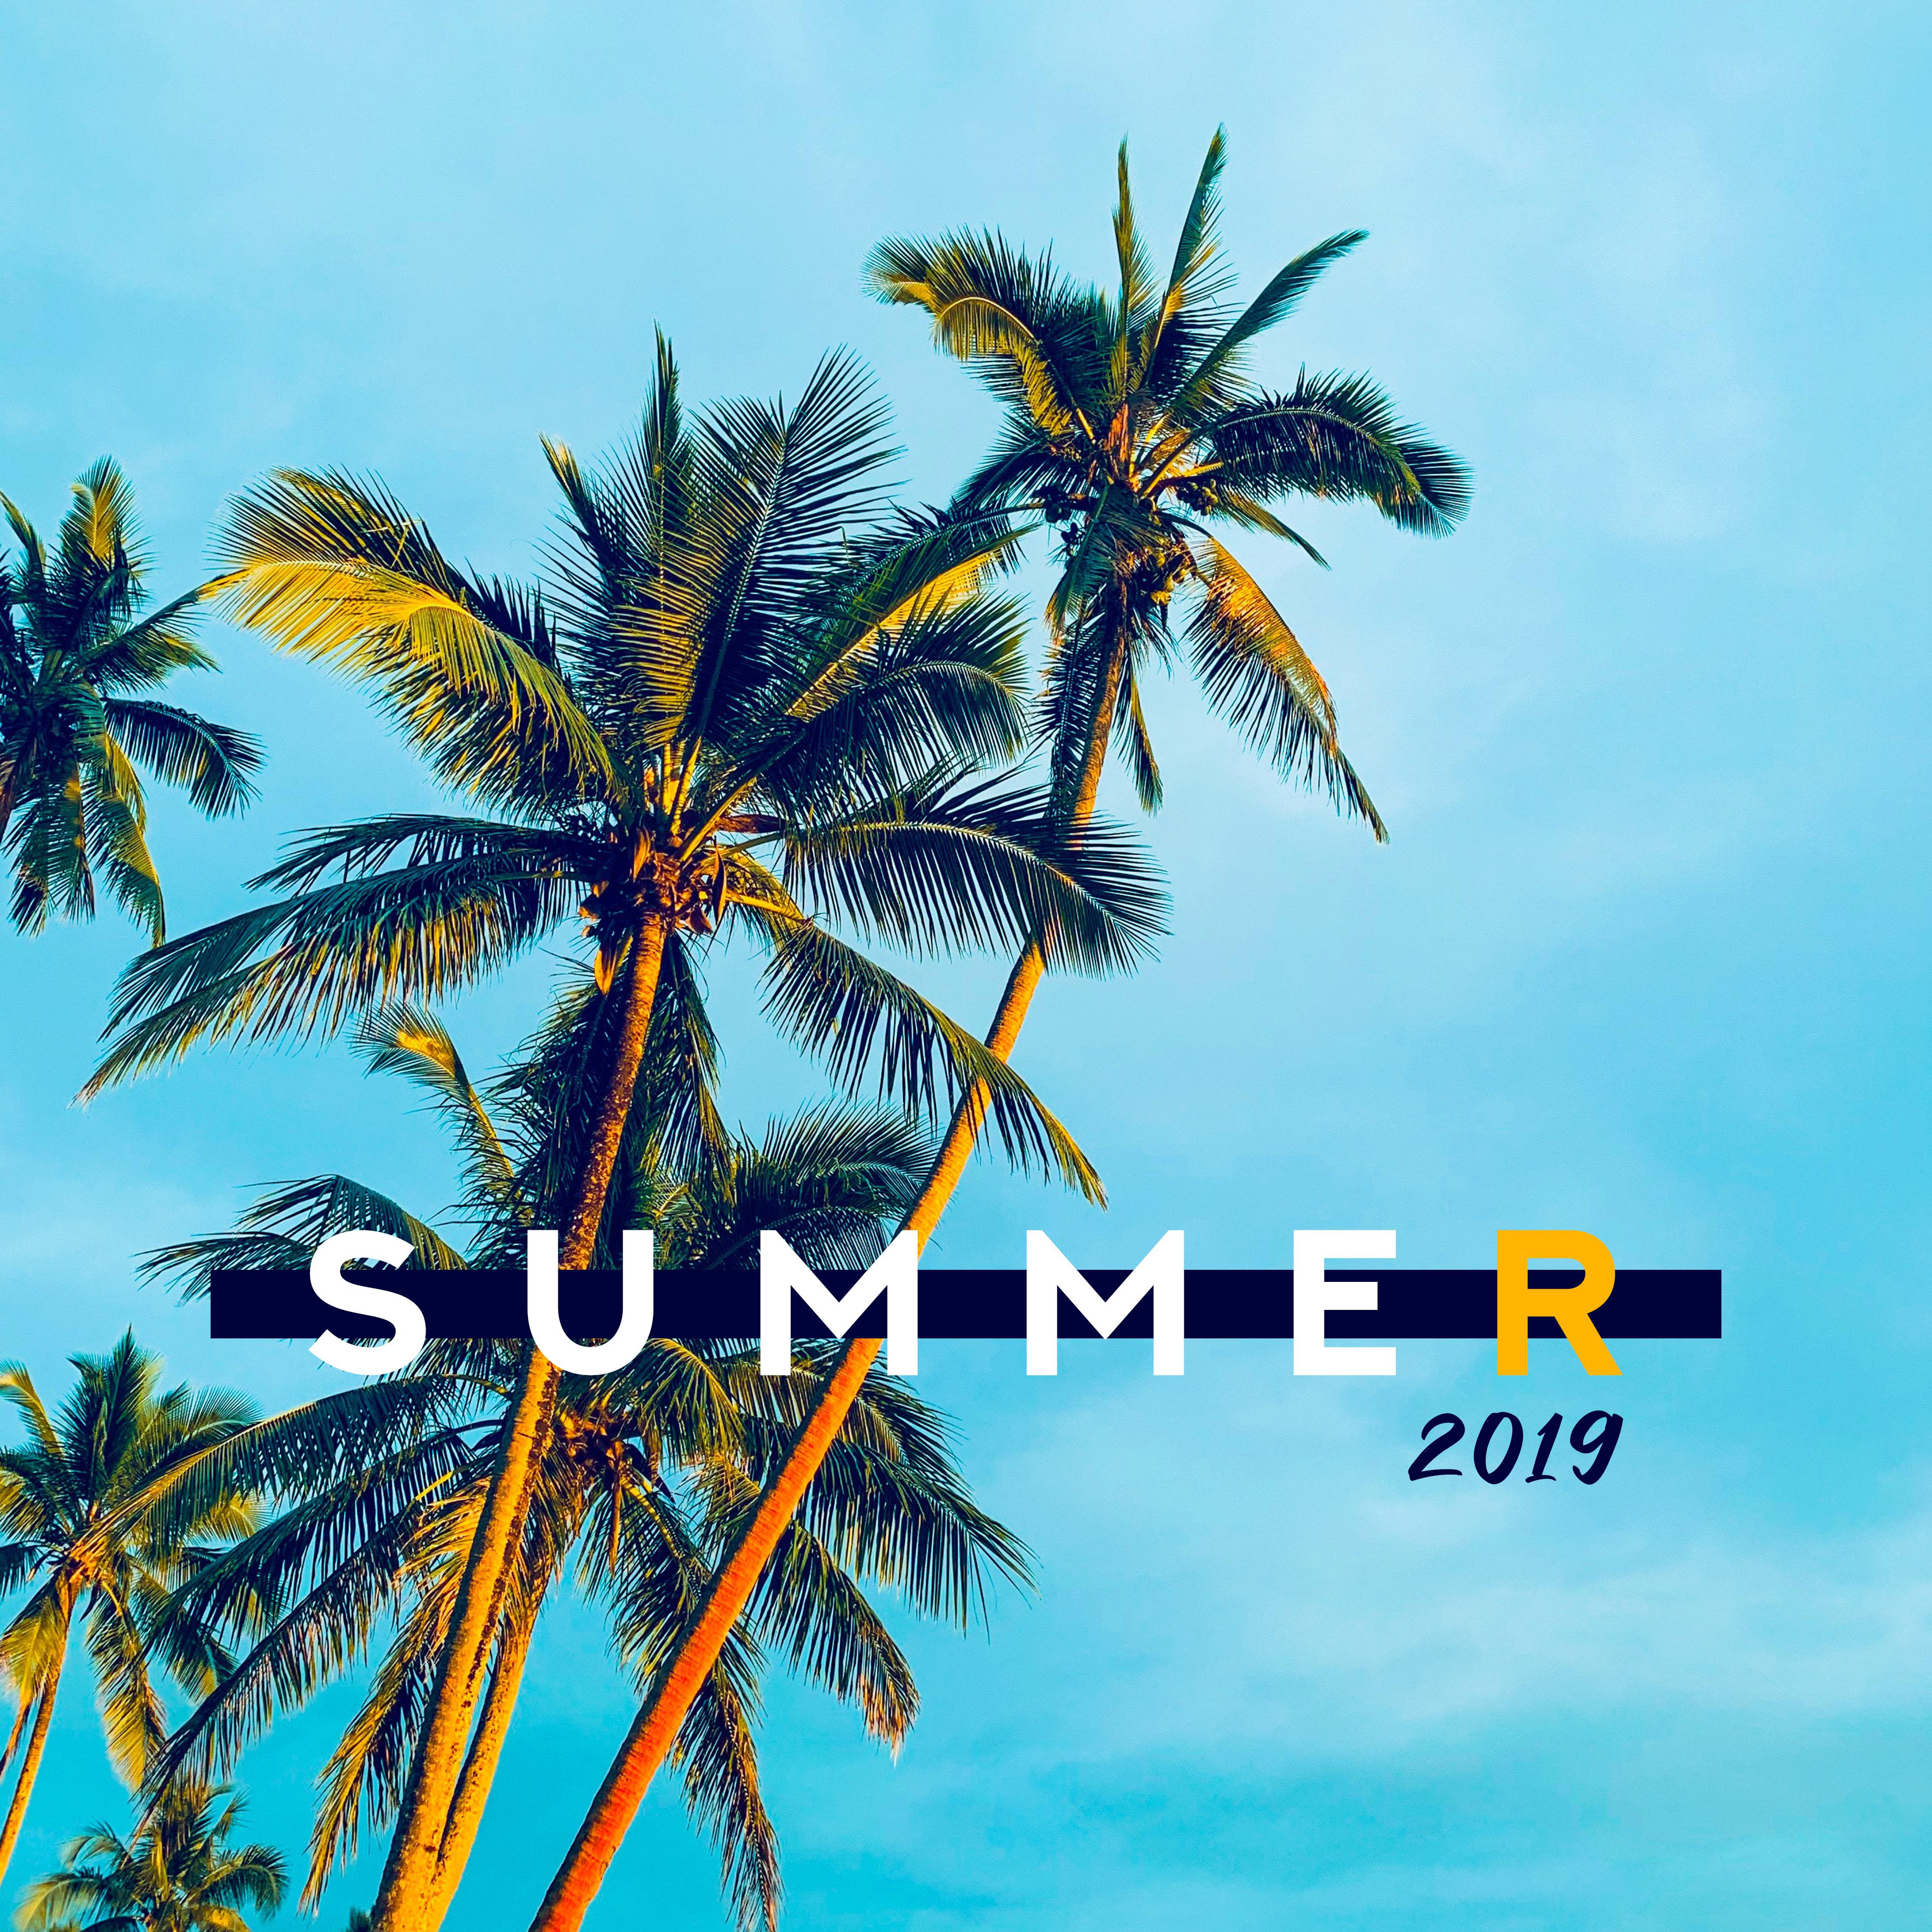 Summer 2019  Sunny Chill Out, Beach Music, Reduce Stress